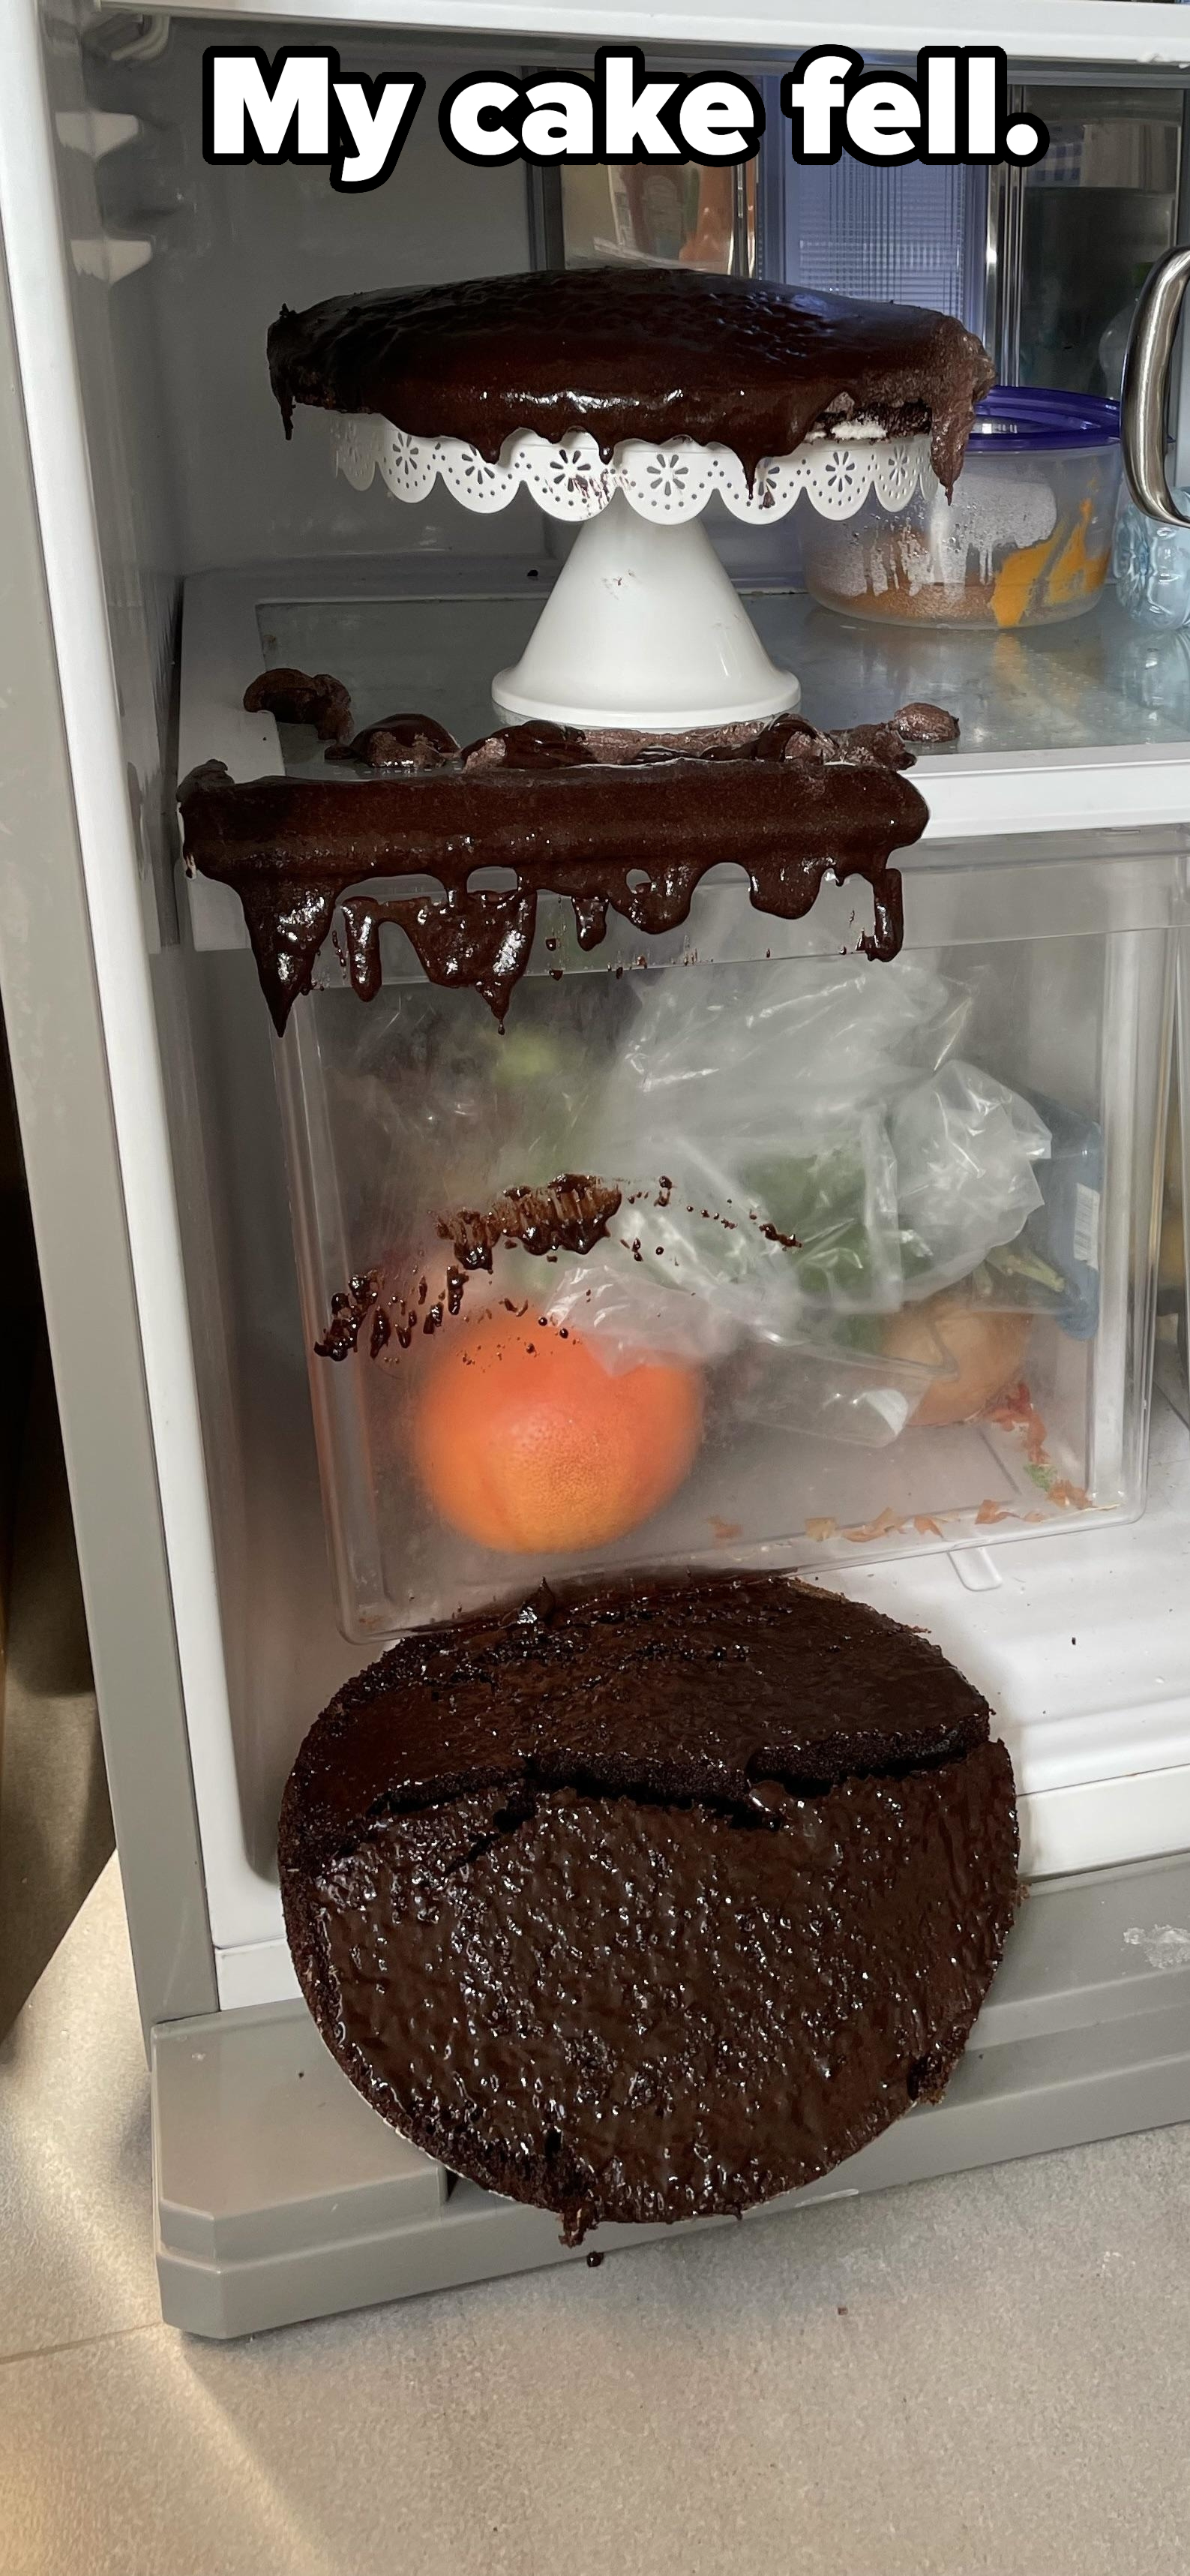 A cake that fell off a cake stand in the refrigerator